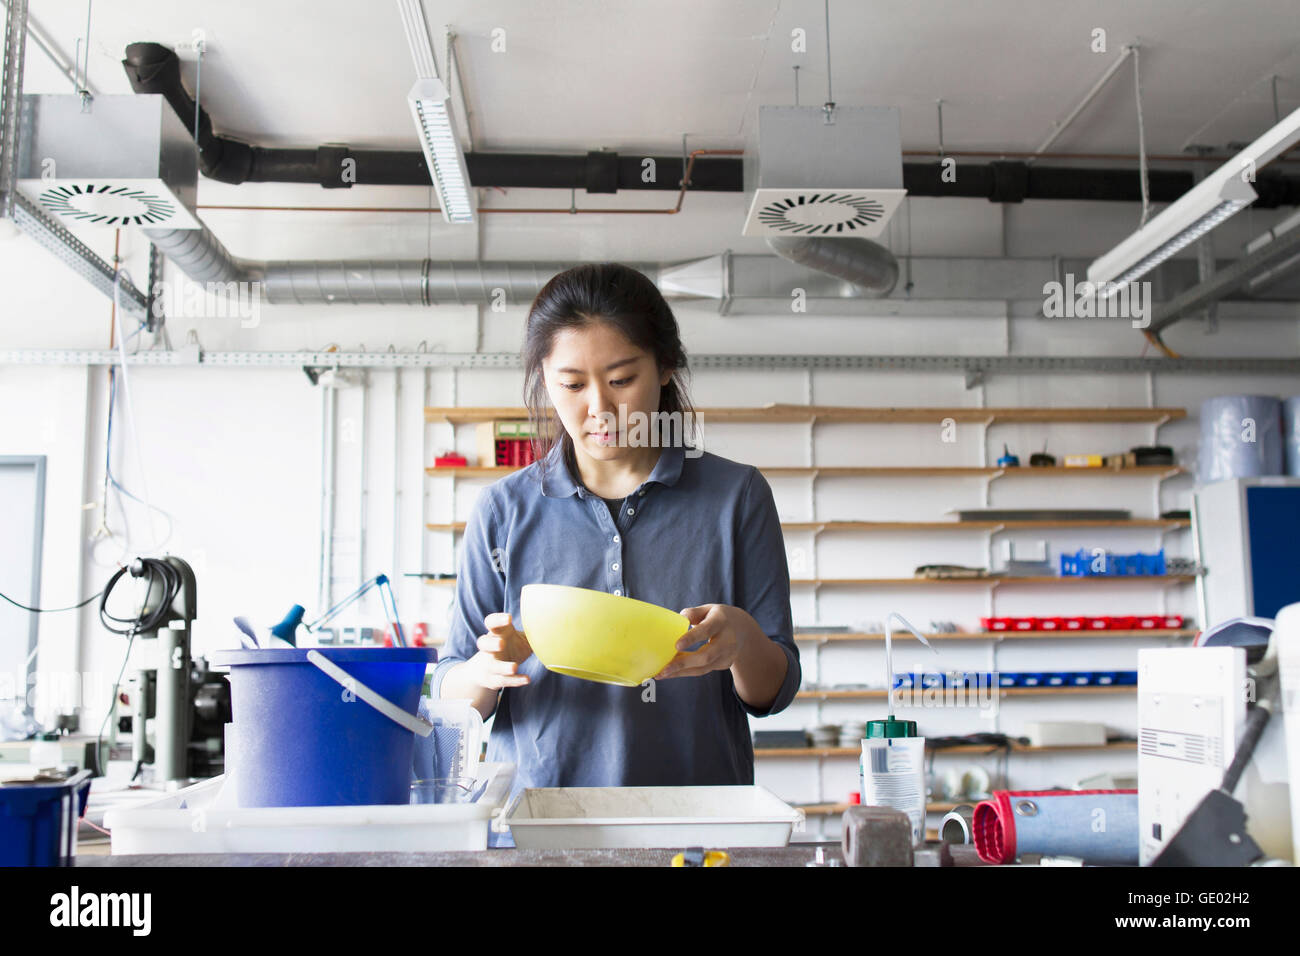 Young female engineer looking into pan in an industrial plant, Freiburg im Breisgau, Baden-Württemberg, Germany Stock Photo